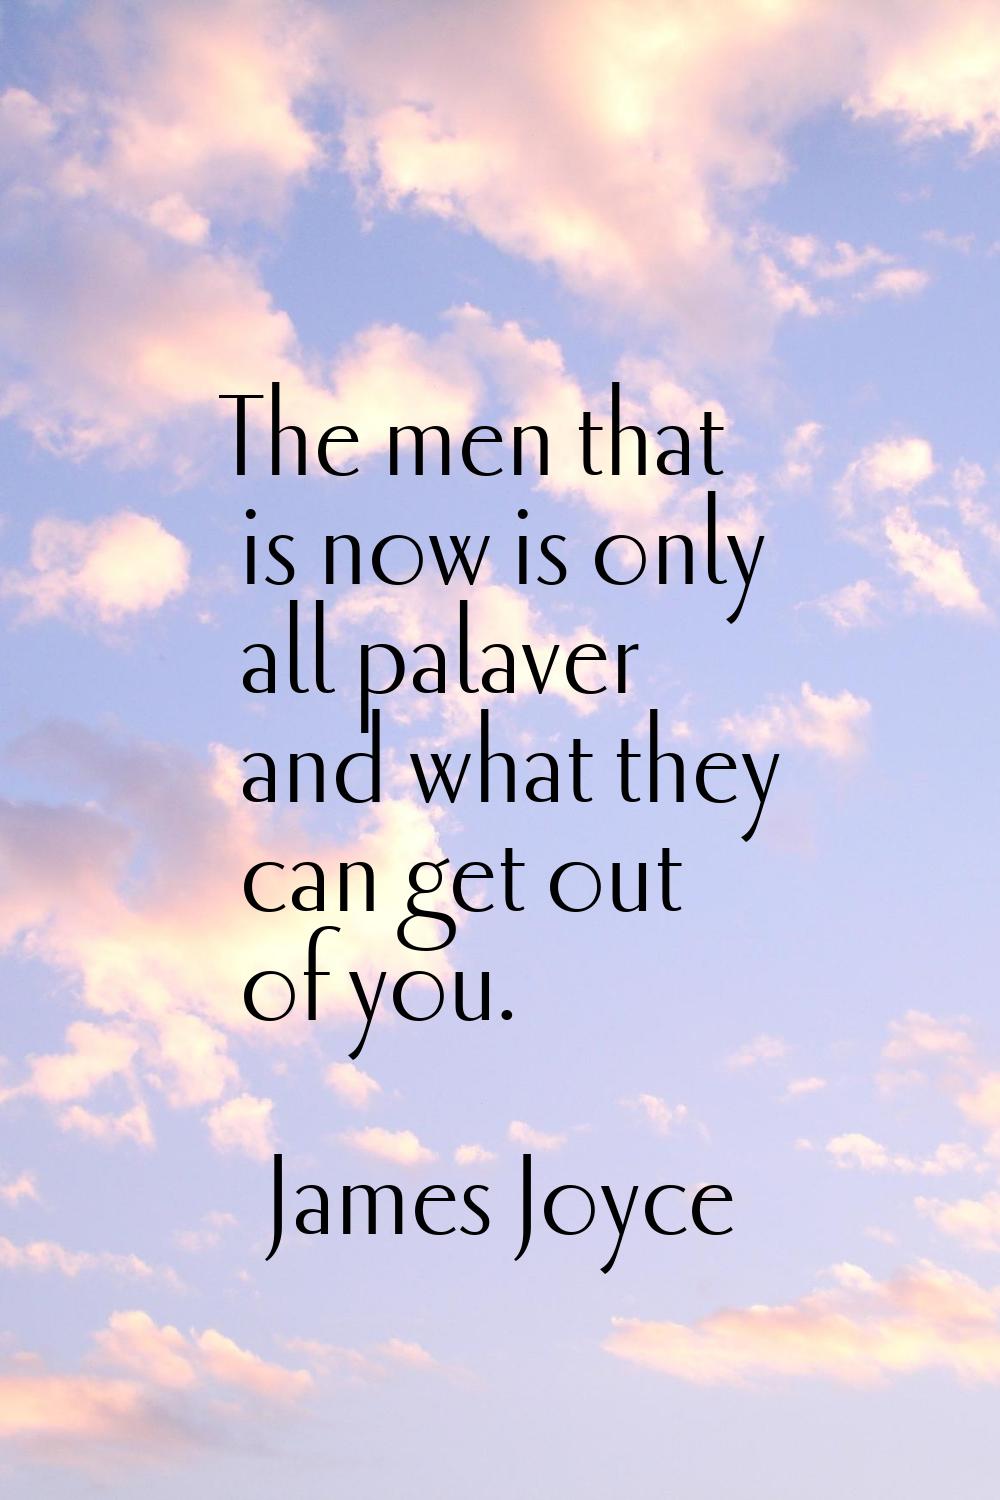 The men that is now is only all palaver and what they can get out of you.